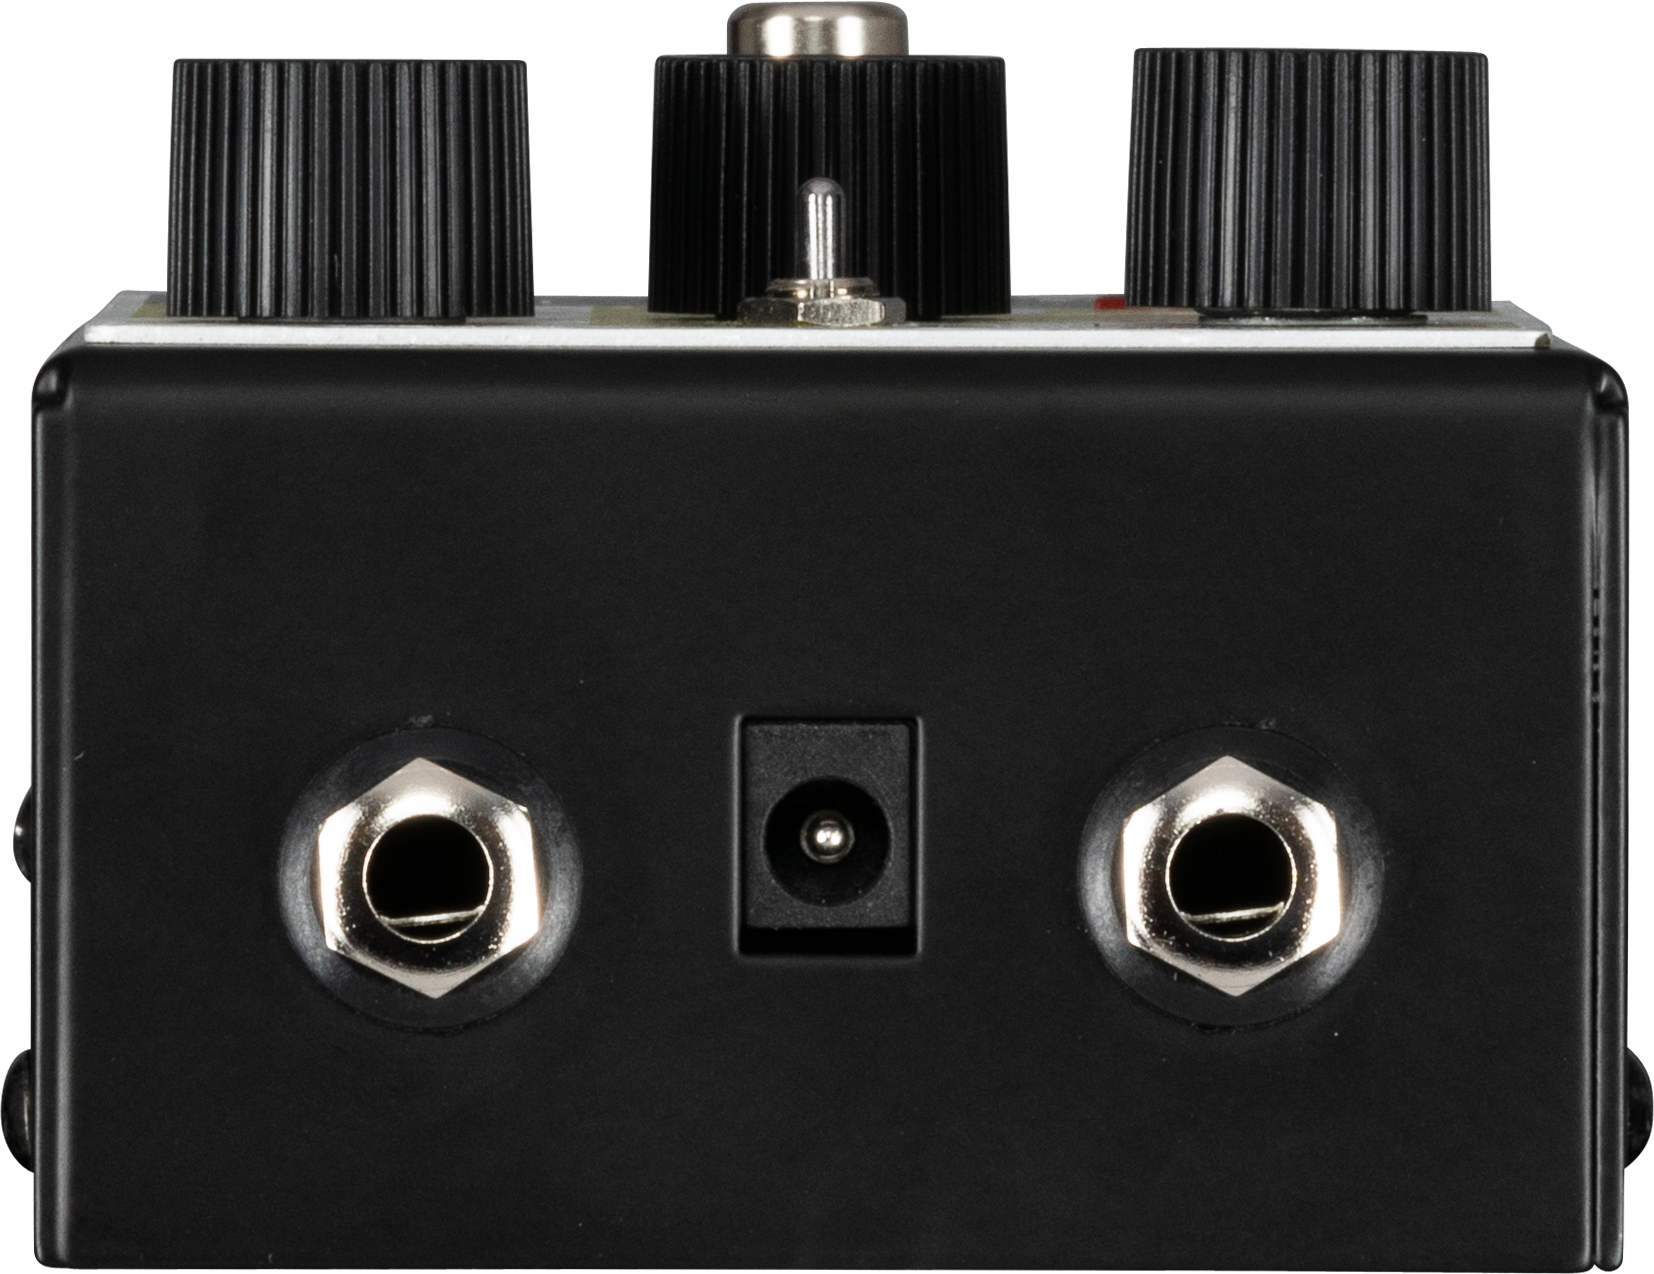 Overdrive pedal with toggle switch for clean or dirty